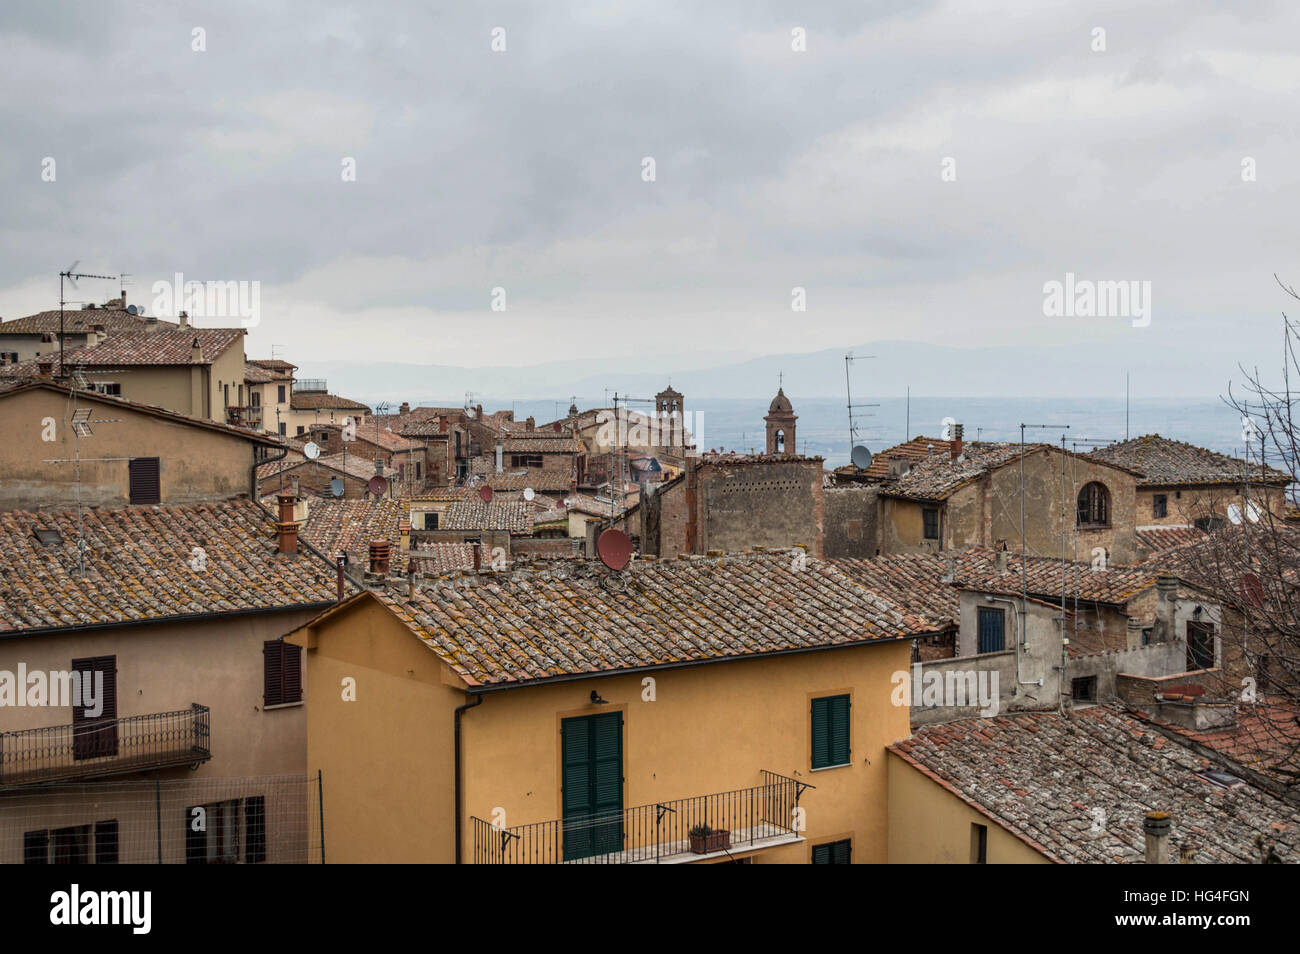 Roofs of the houses of Montepulciano, little village in province of Siena, Tuscany. Stock Photo